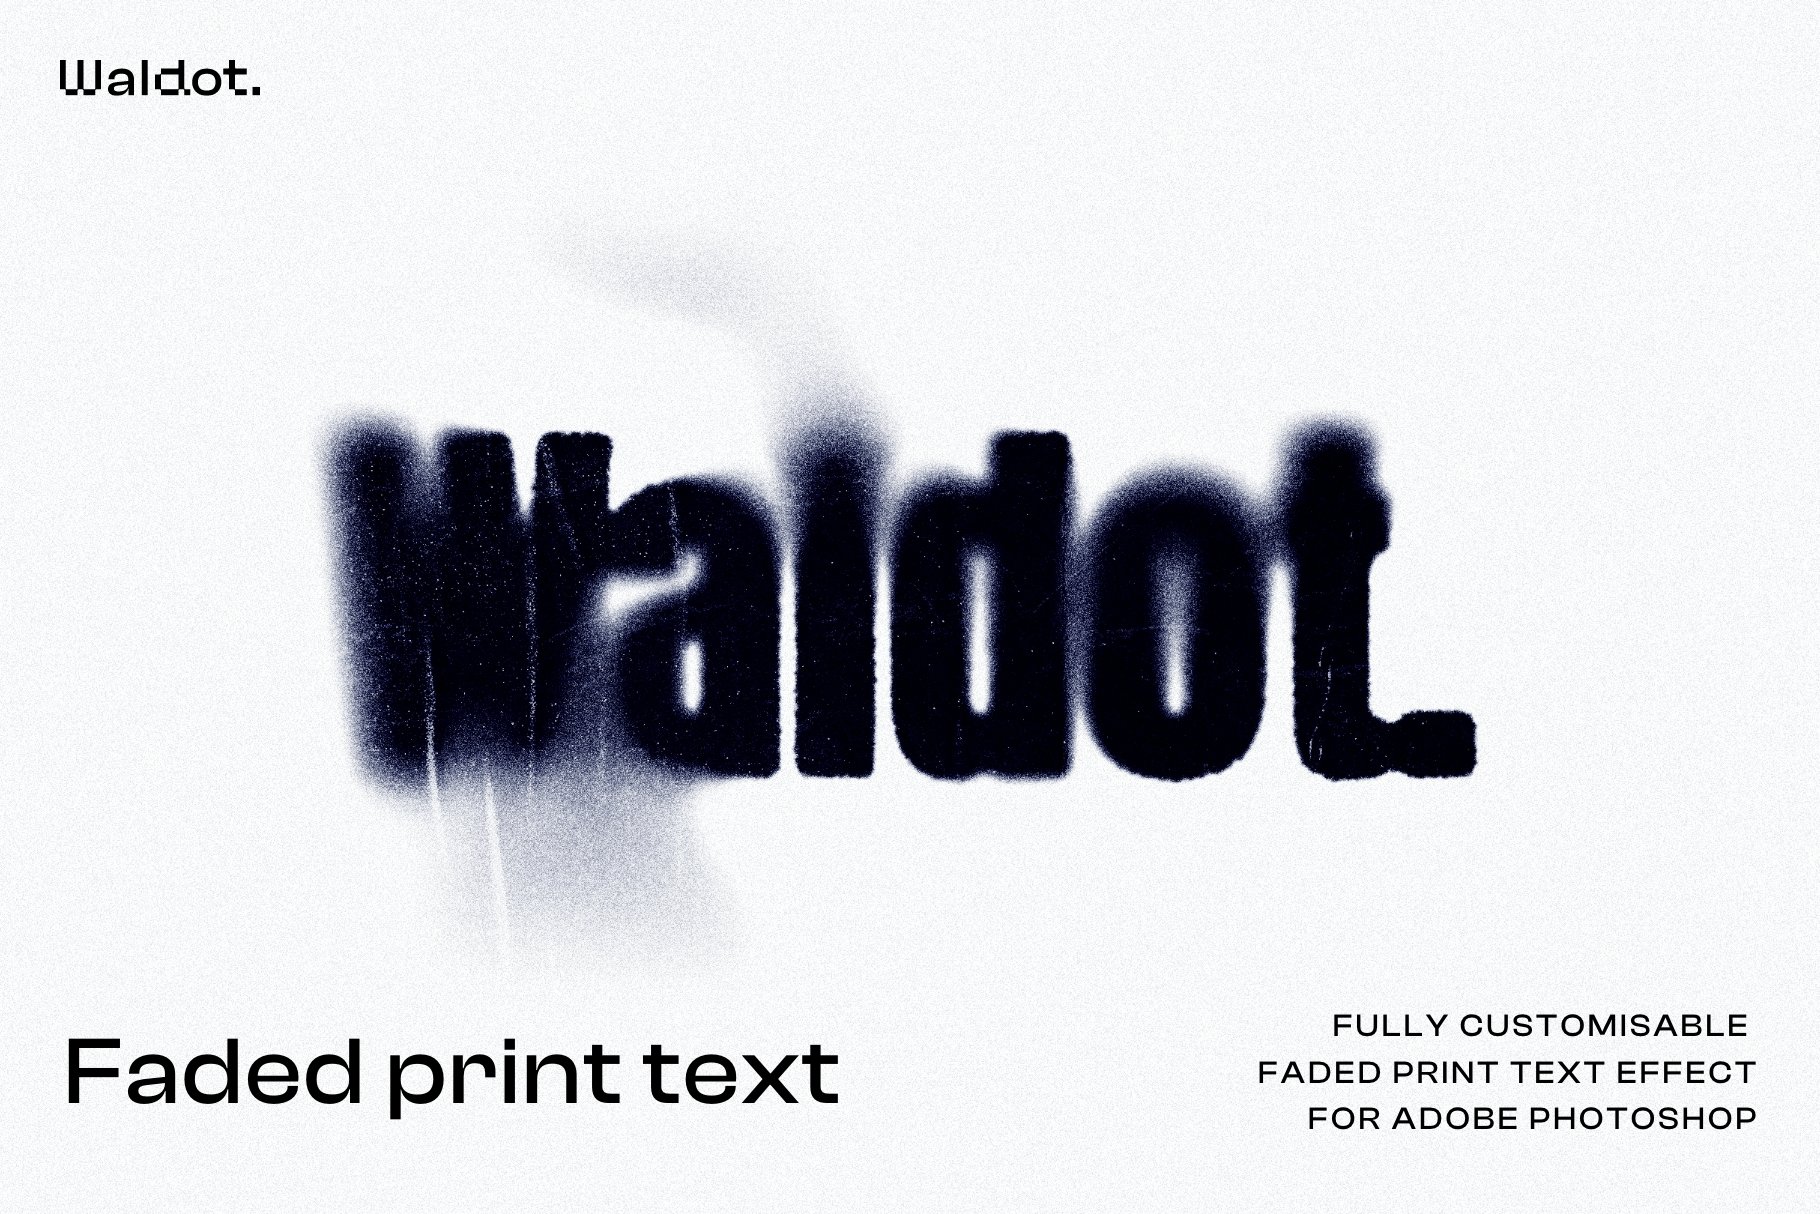 Faded print textpreview image.